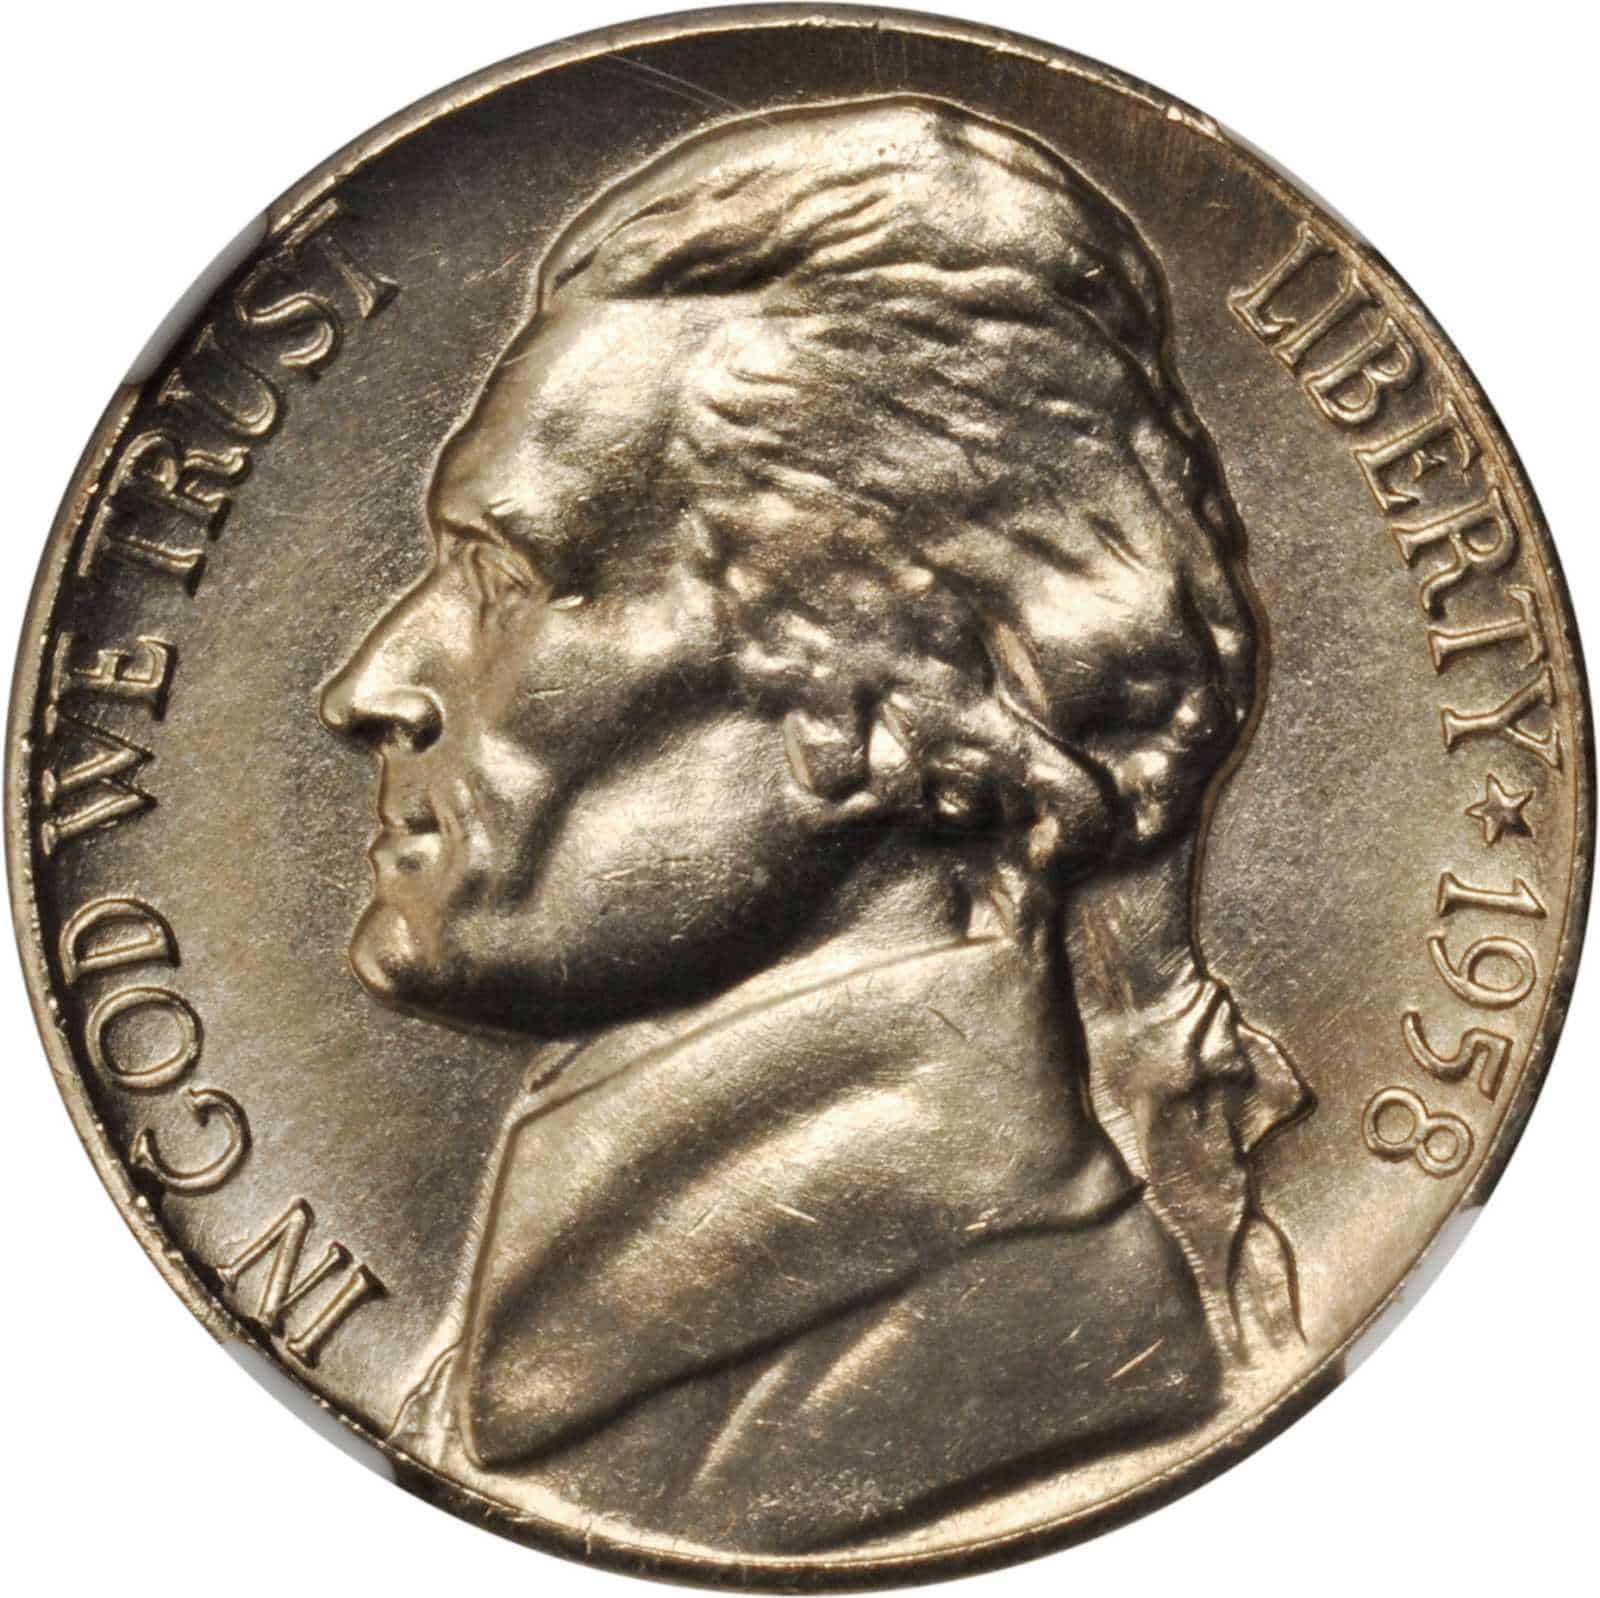 The Obverse of the 1958 Nickel